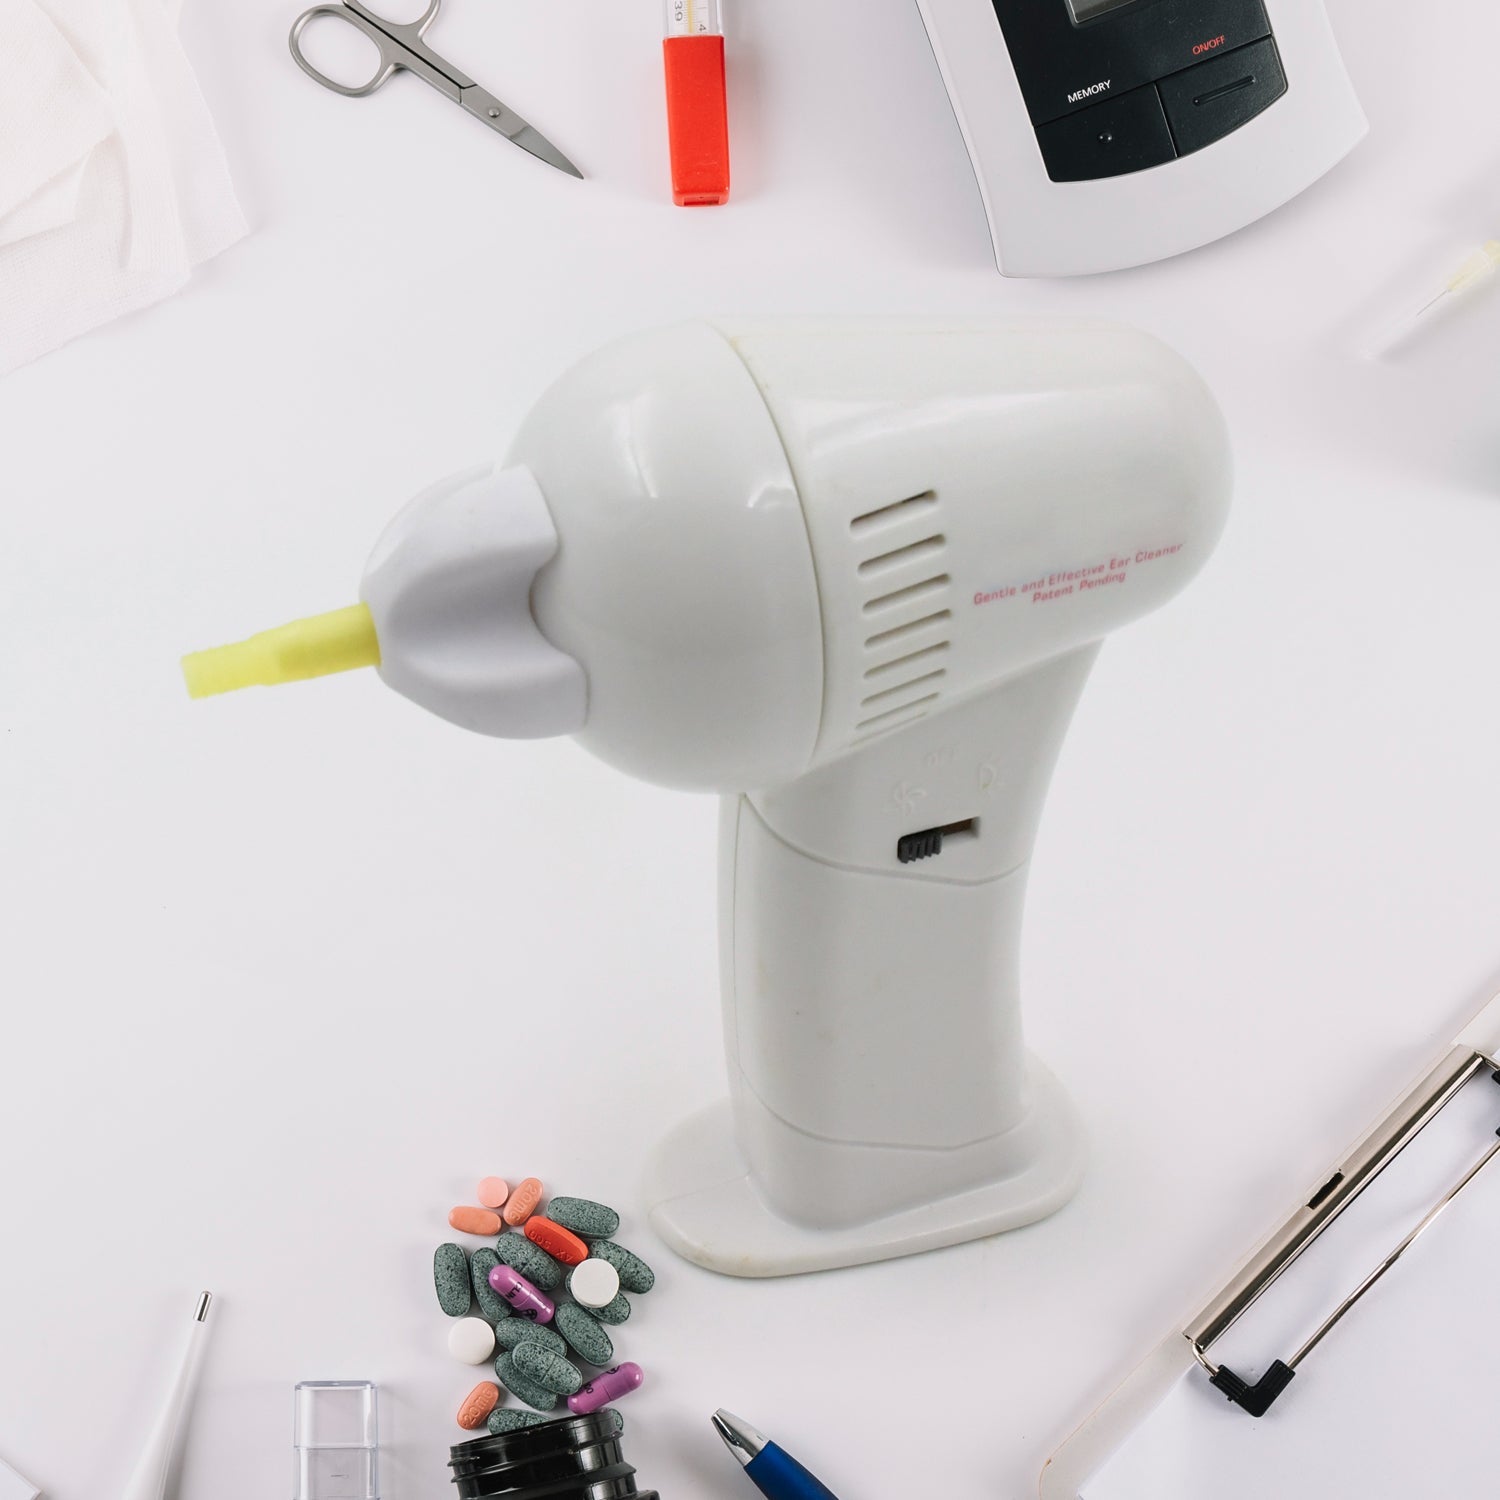 7247 Vacuum Ear Cleaning System Clean Ears Care Removel Tool Earpick Cleaner Vacuum Removal Kit Safe Gentle Hygienic with 8 Silicon Cleaner Clips and Cleaning Brush